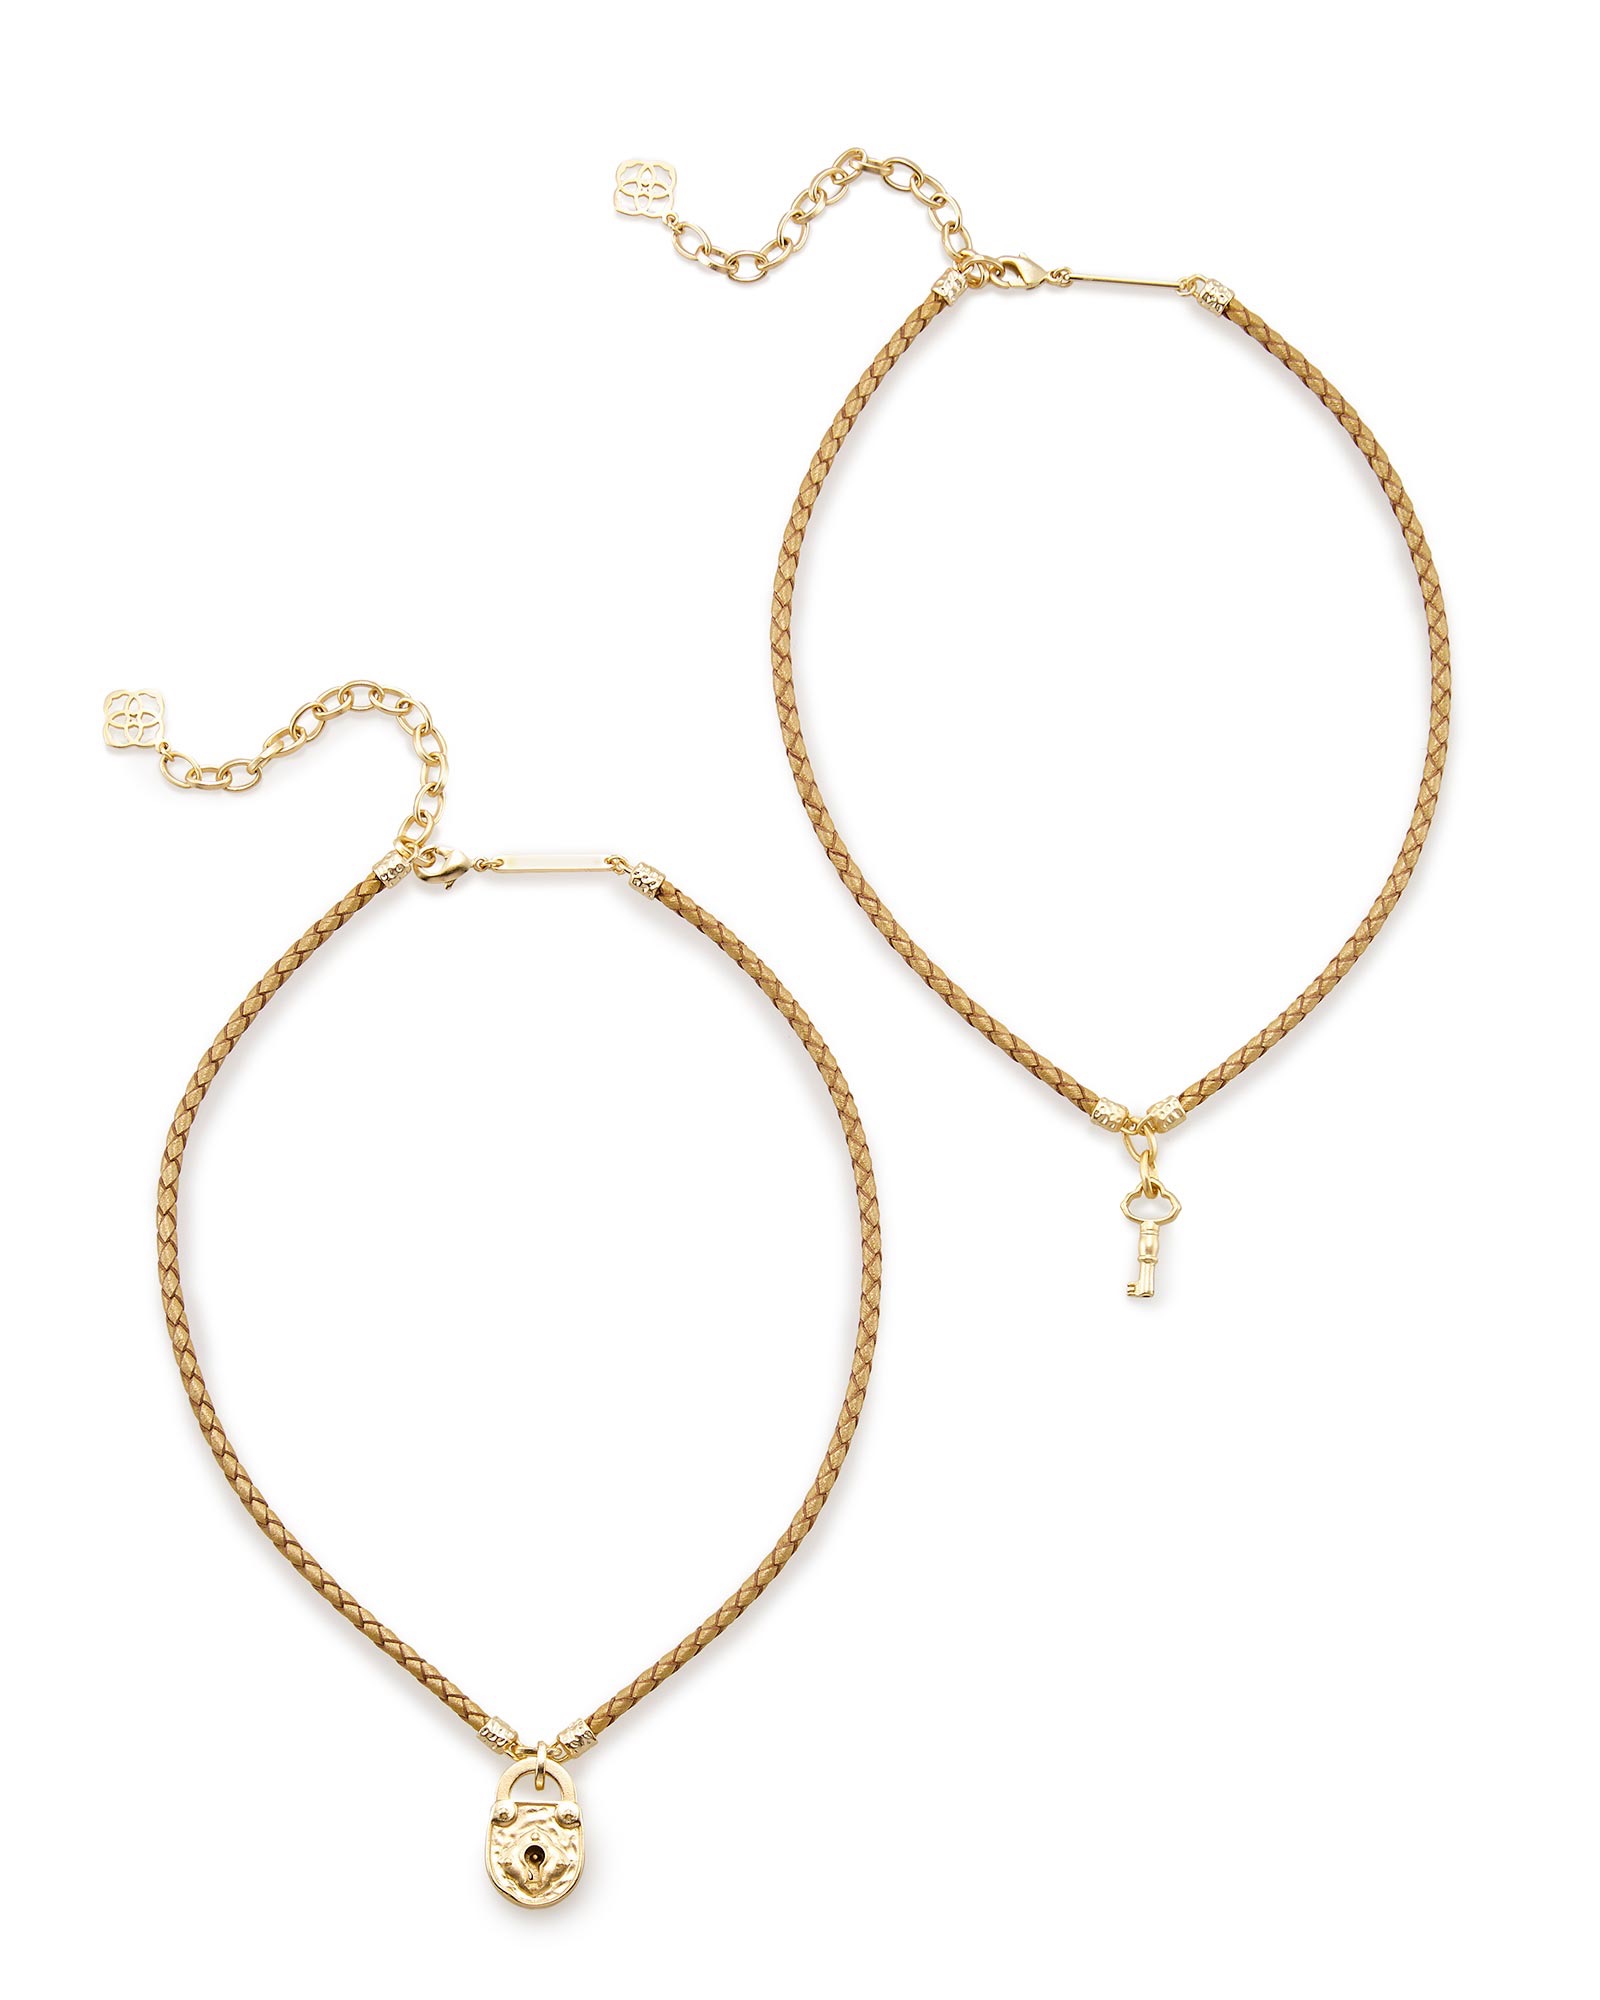 Sunny Choker Necklace Set in Gold Cord | Kendra Scott